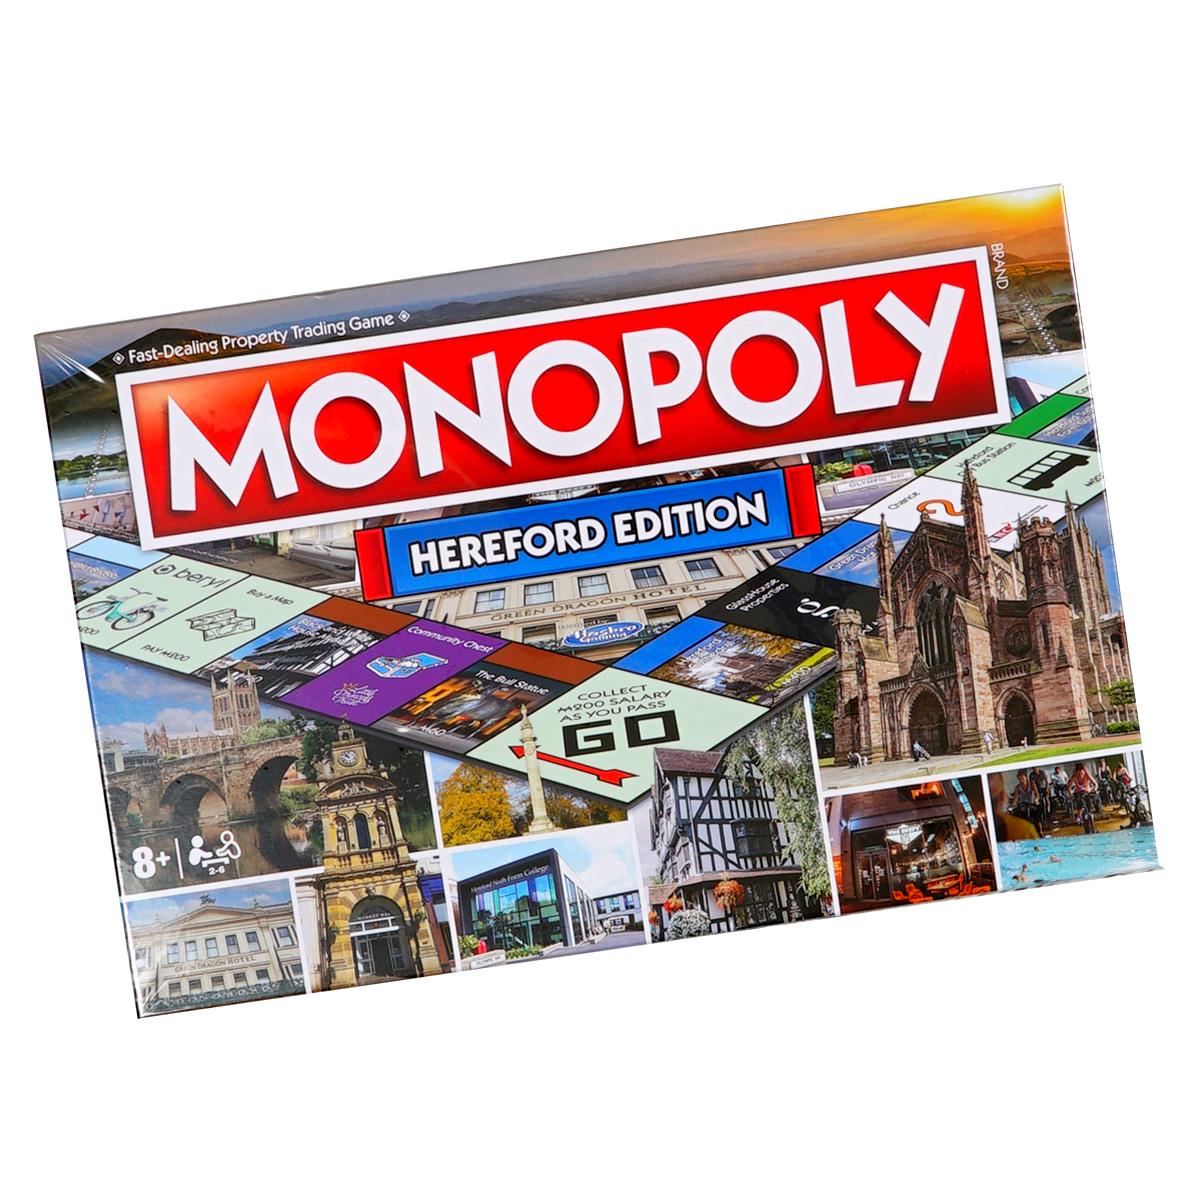 What specific features are included in the Hereford Monopoly edition?